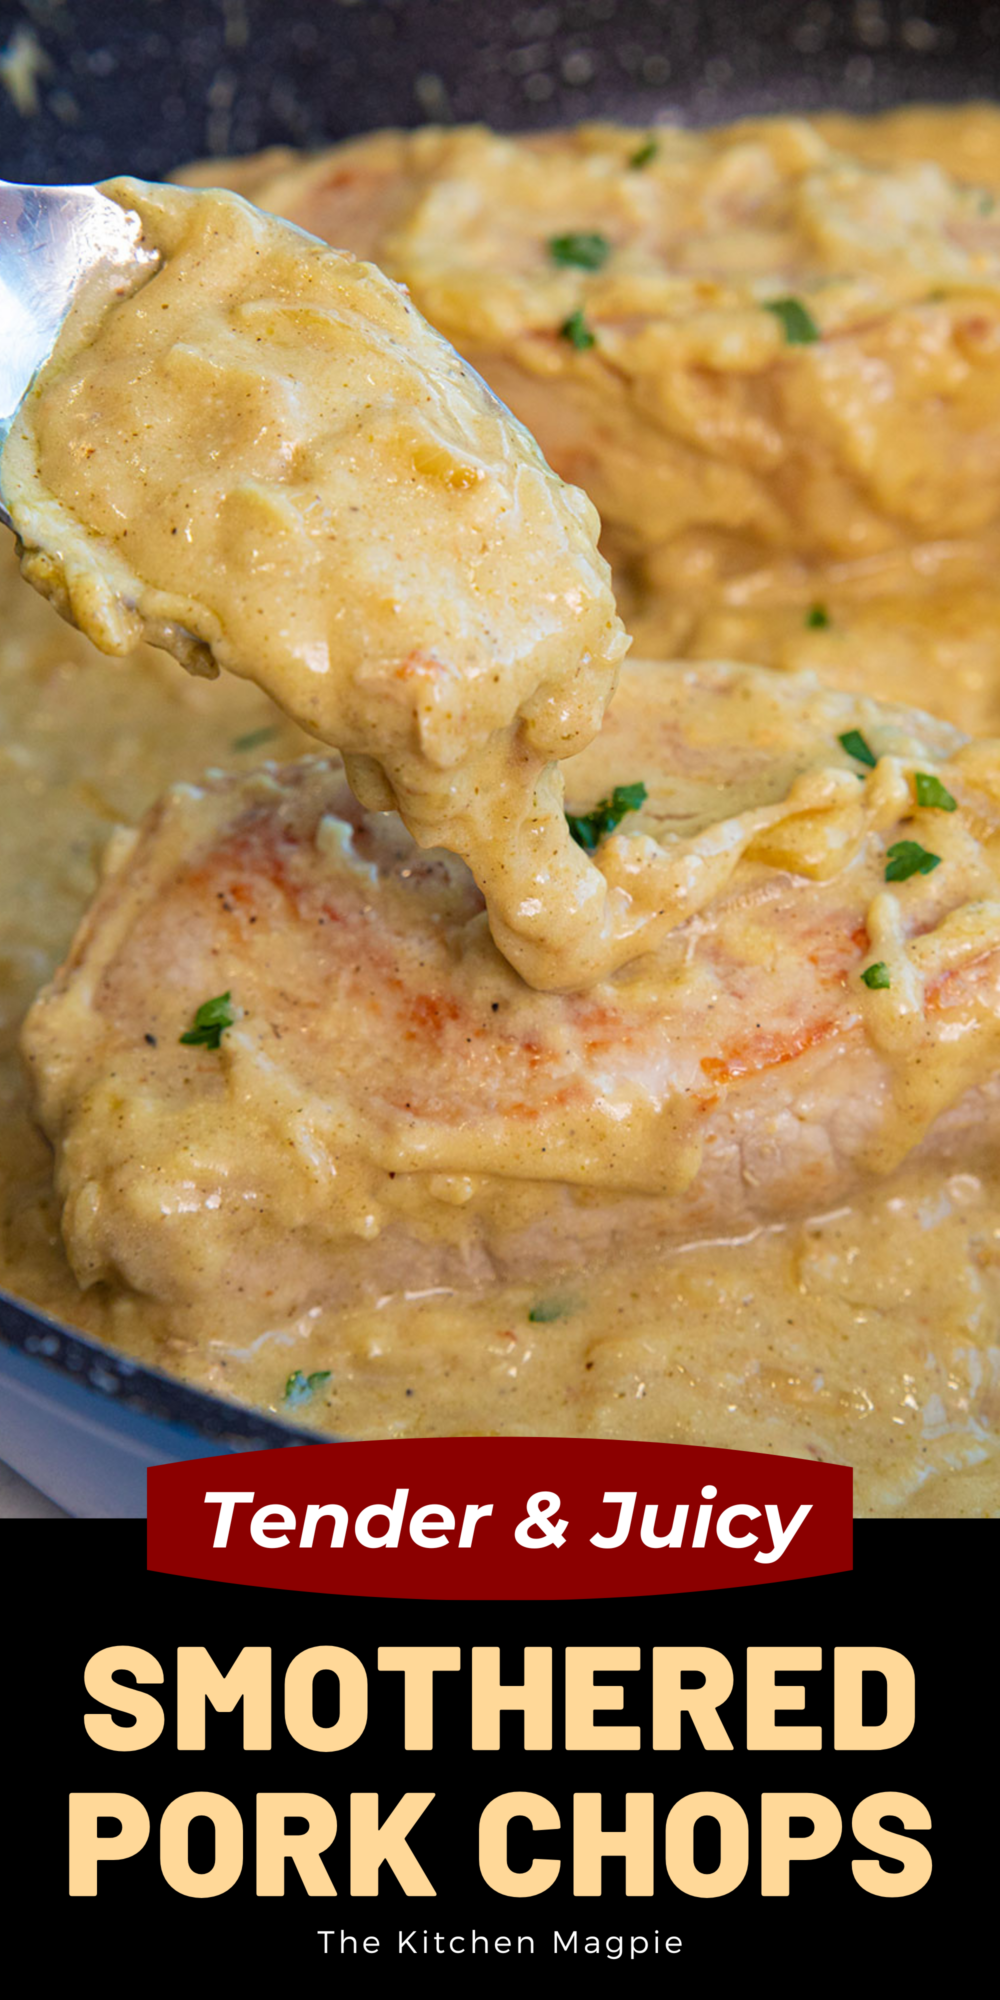 Pork chops smothered in a delicious creamy onion sauce that is loaded with herbs and buttermilk.